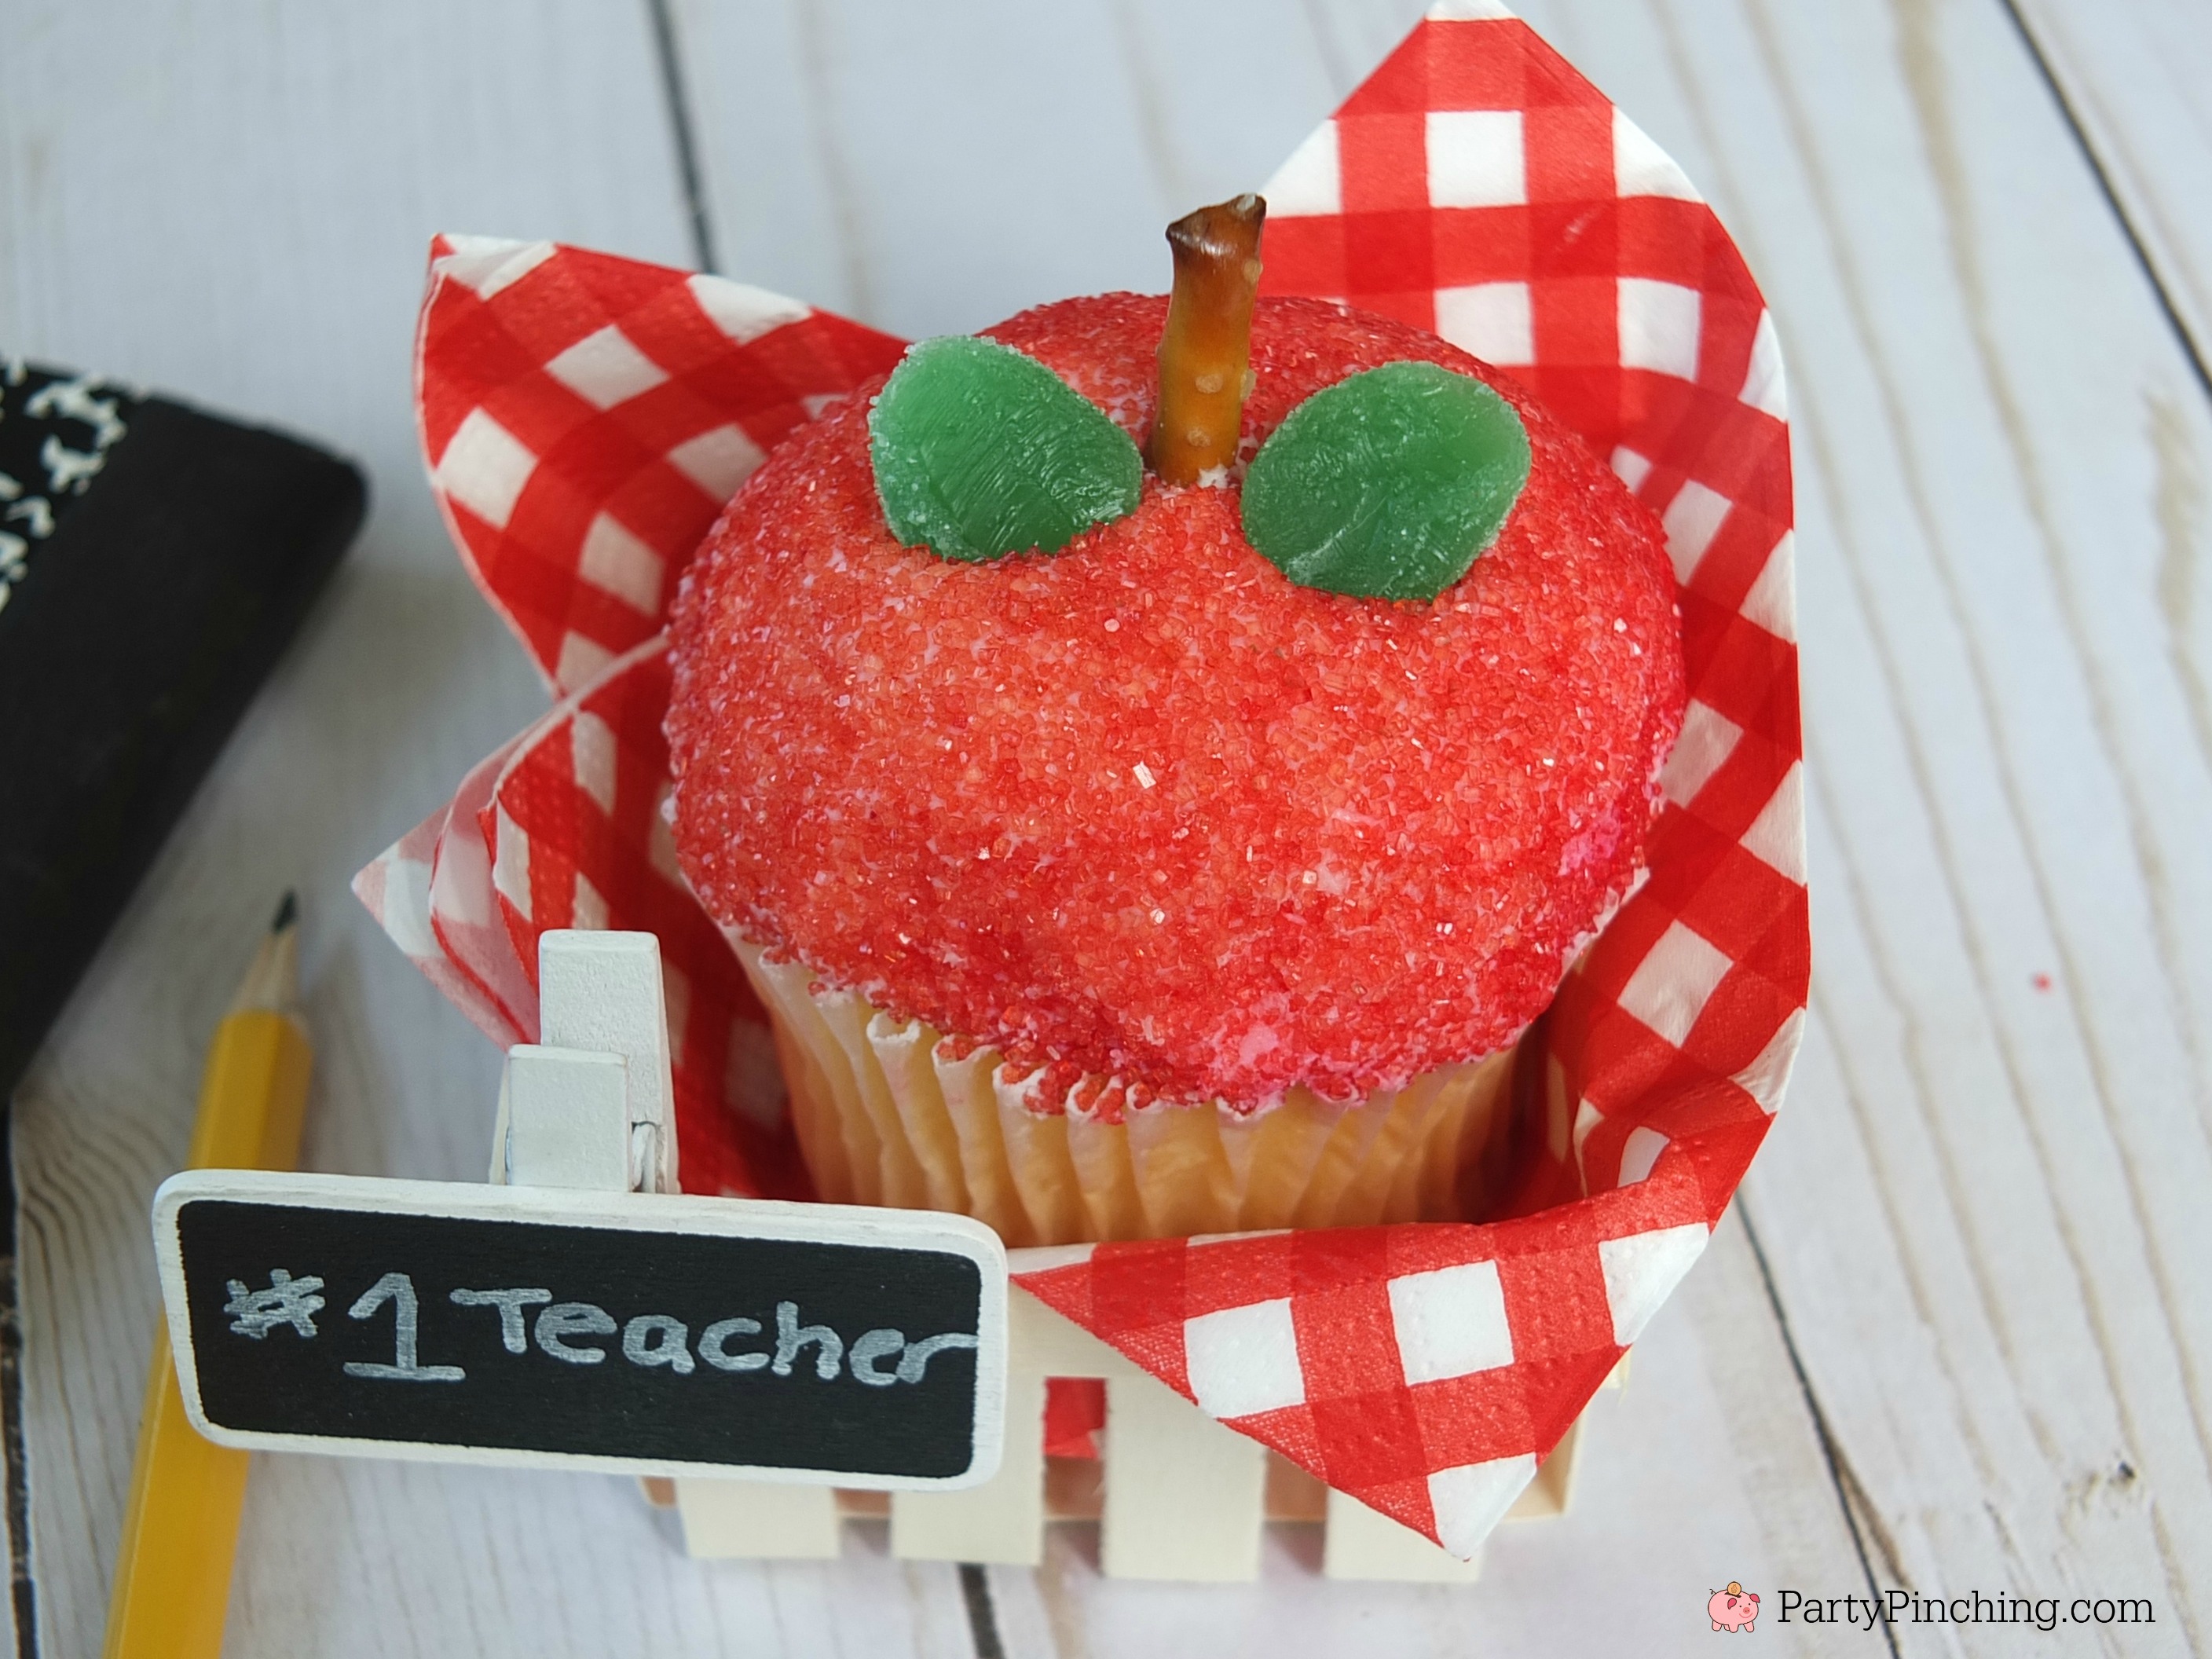 Back to school apple cupcakes, teacher gift treat ideas, fun and easy cupcakes, apple decorated cupcakes, store bought cupcakes, fun food for kids, sweet treats, after school snack, school party classroom ideas